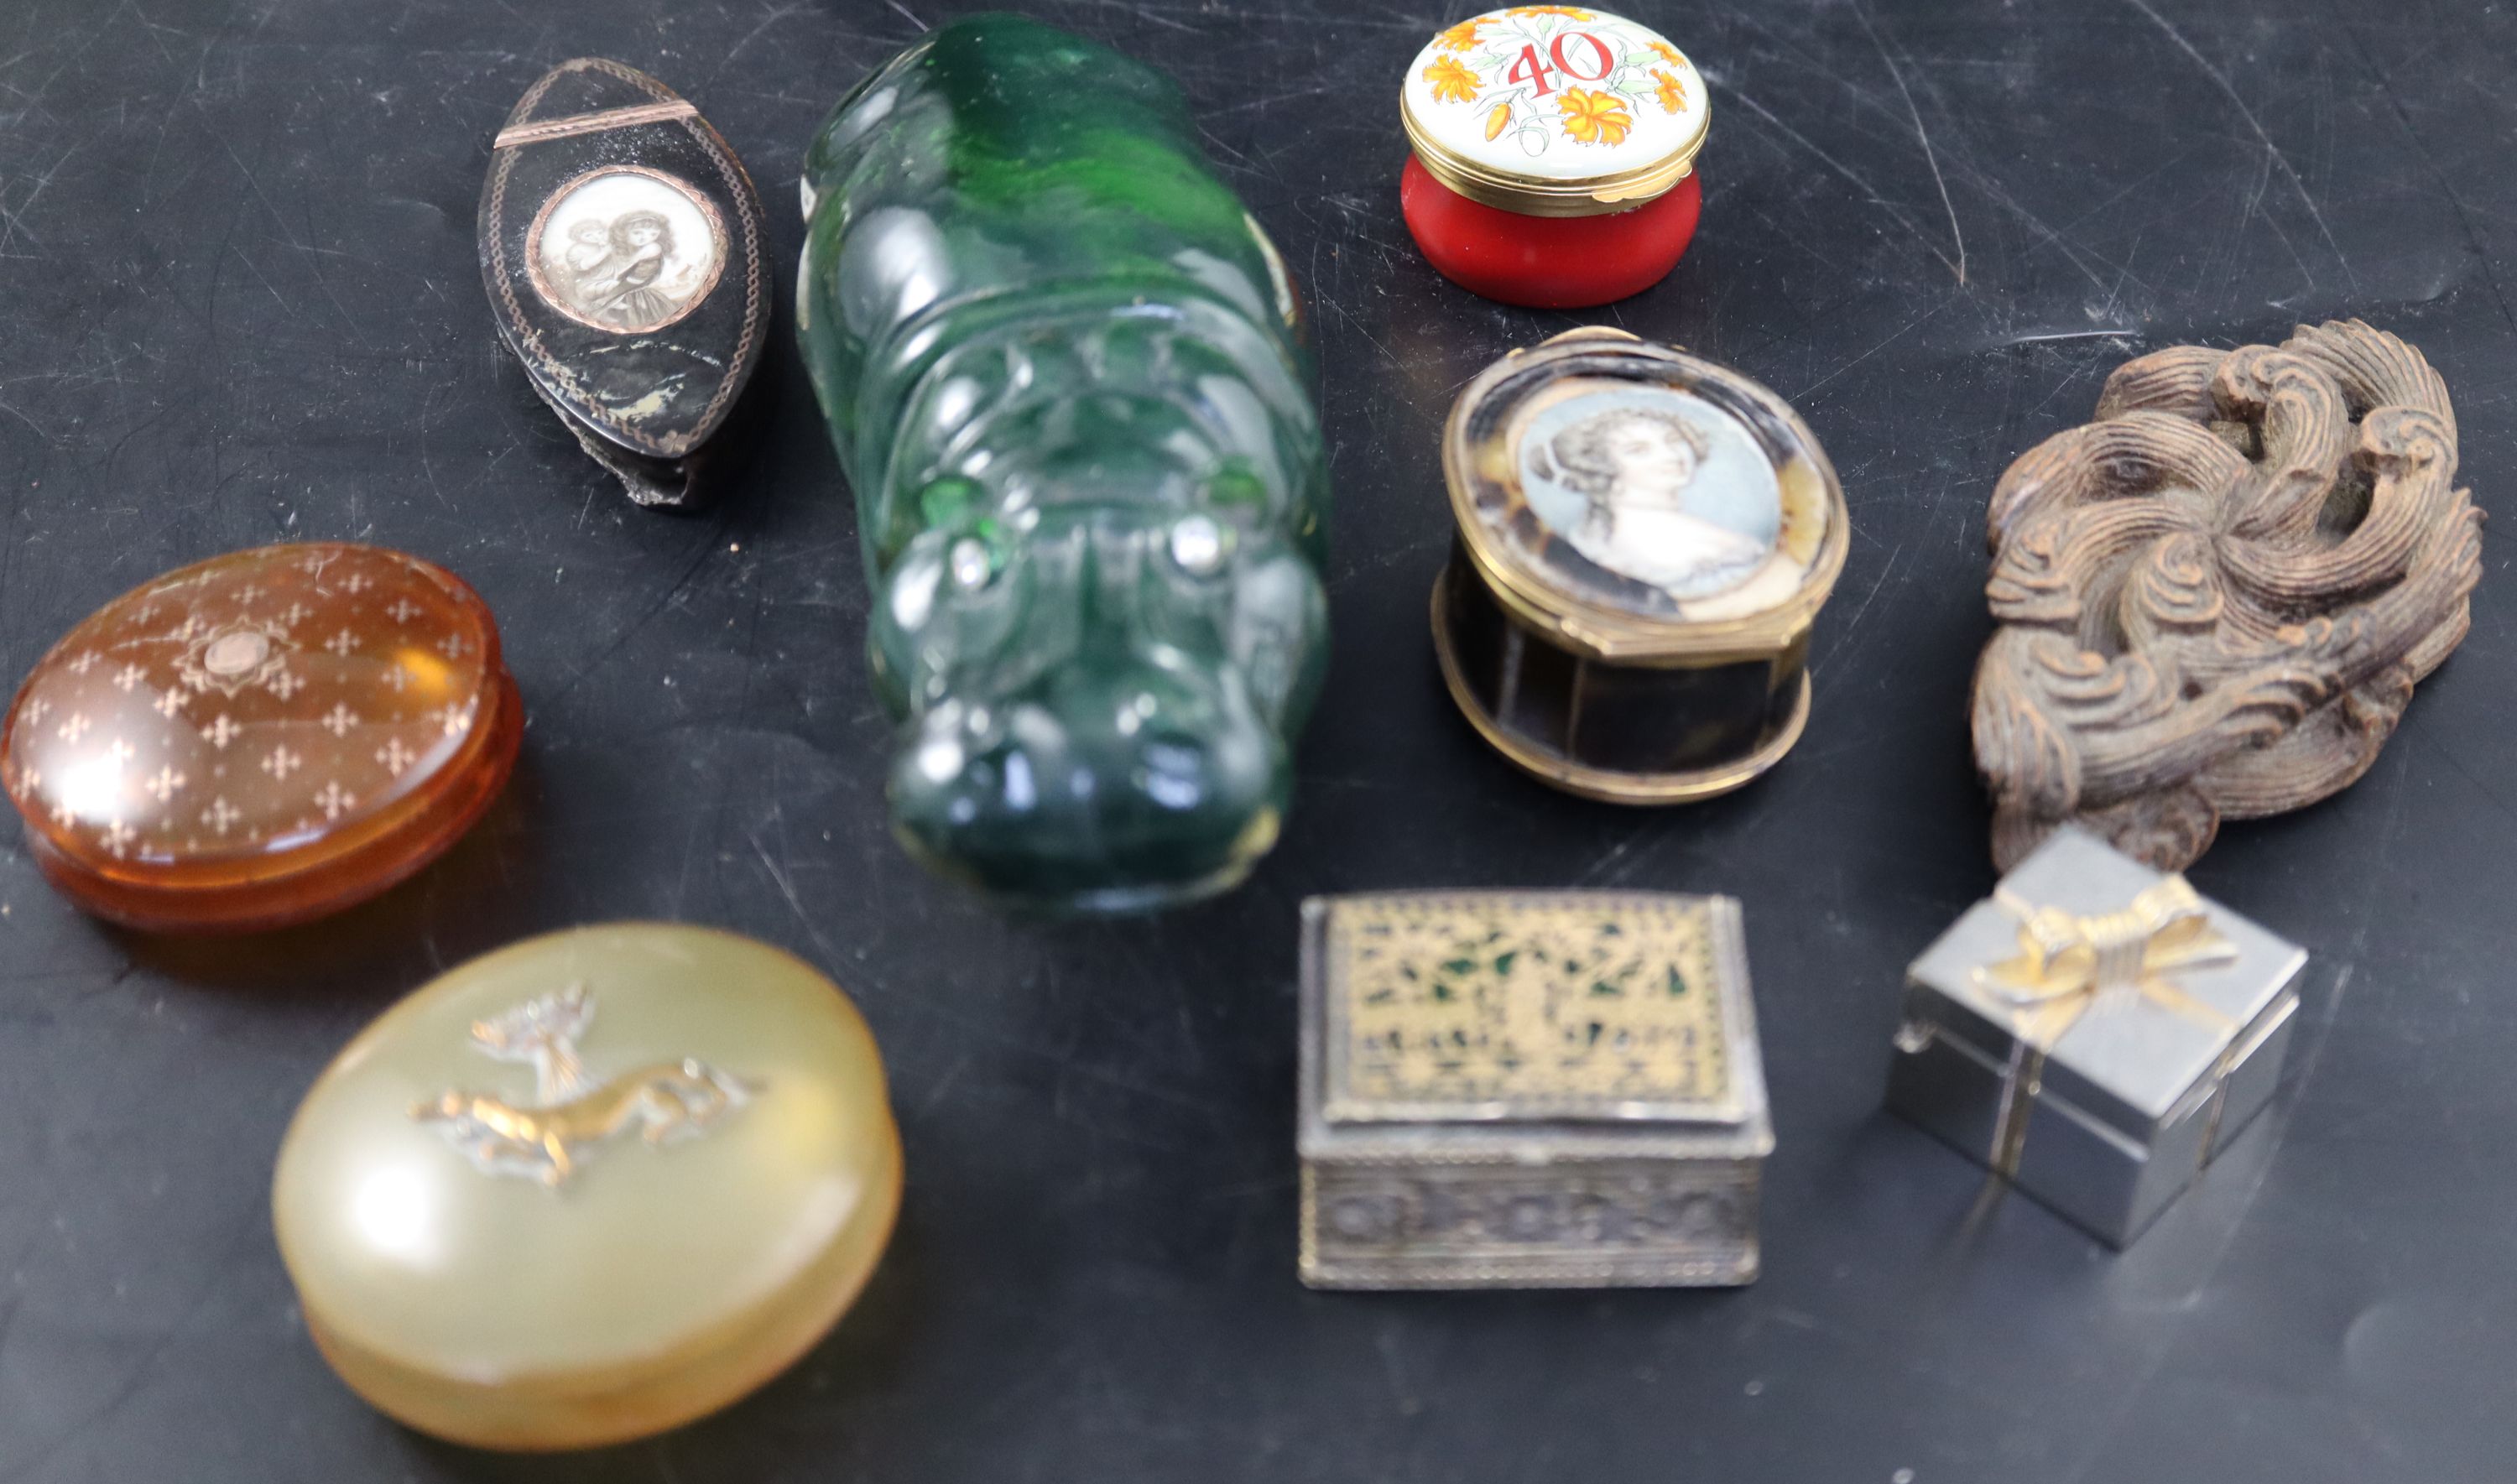 A group of assorted small boxes and objects dart including ivory and tortoiseshell